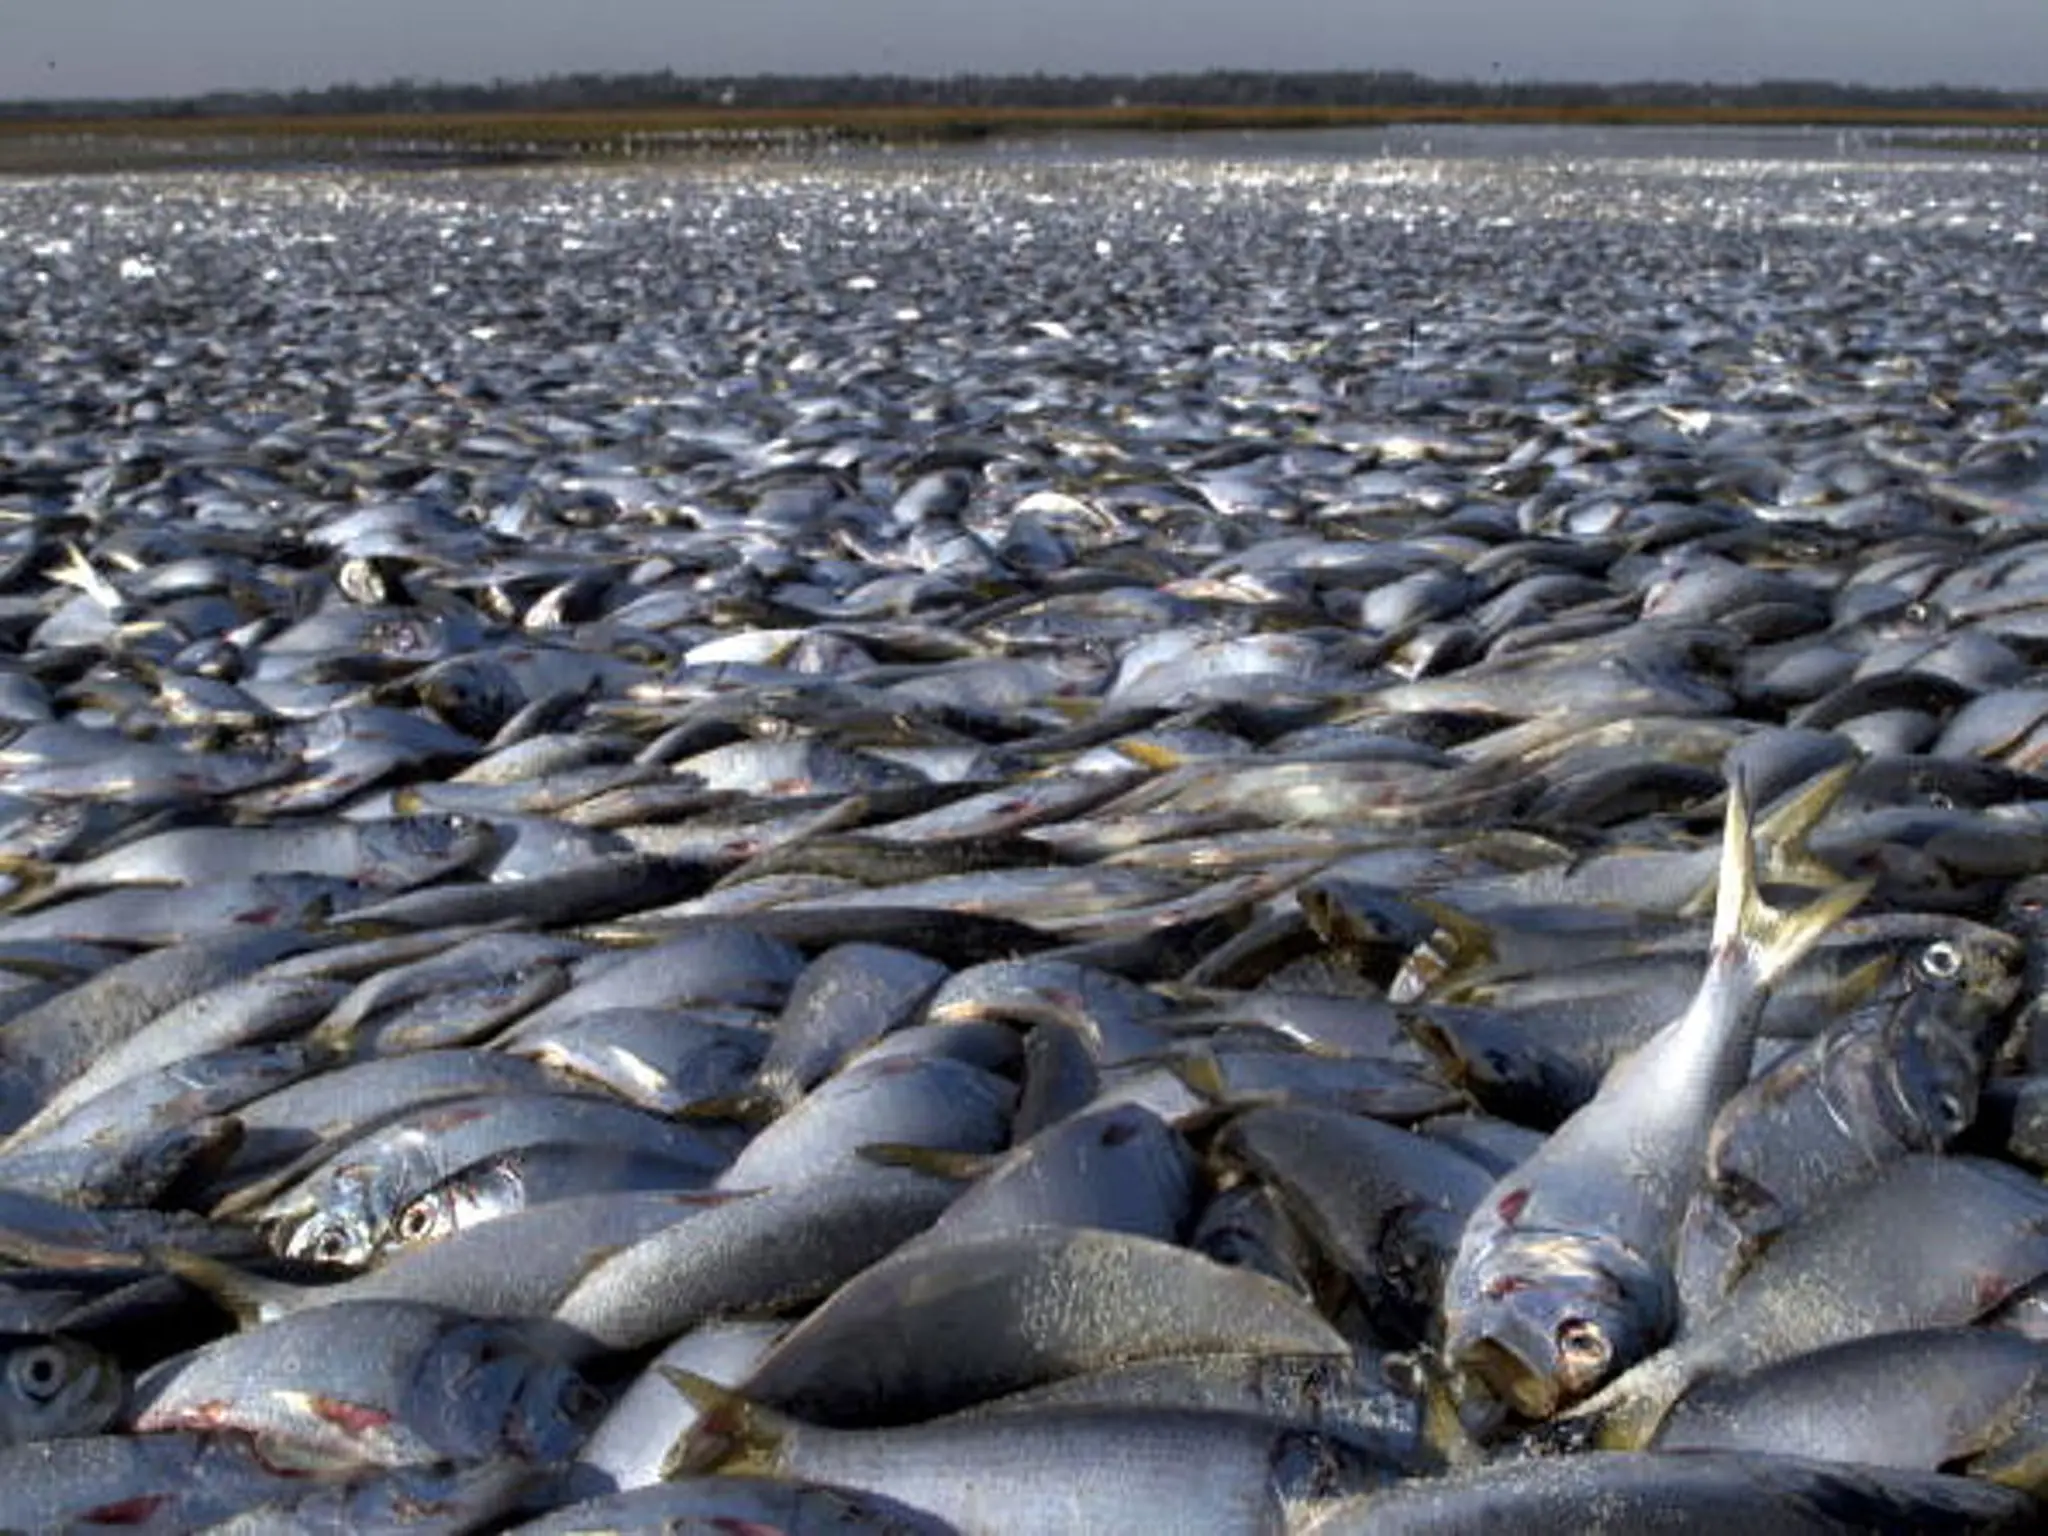 Texas coastline is littered with tons of fish dead